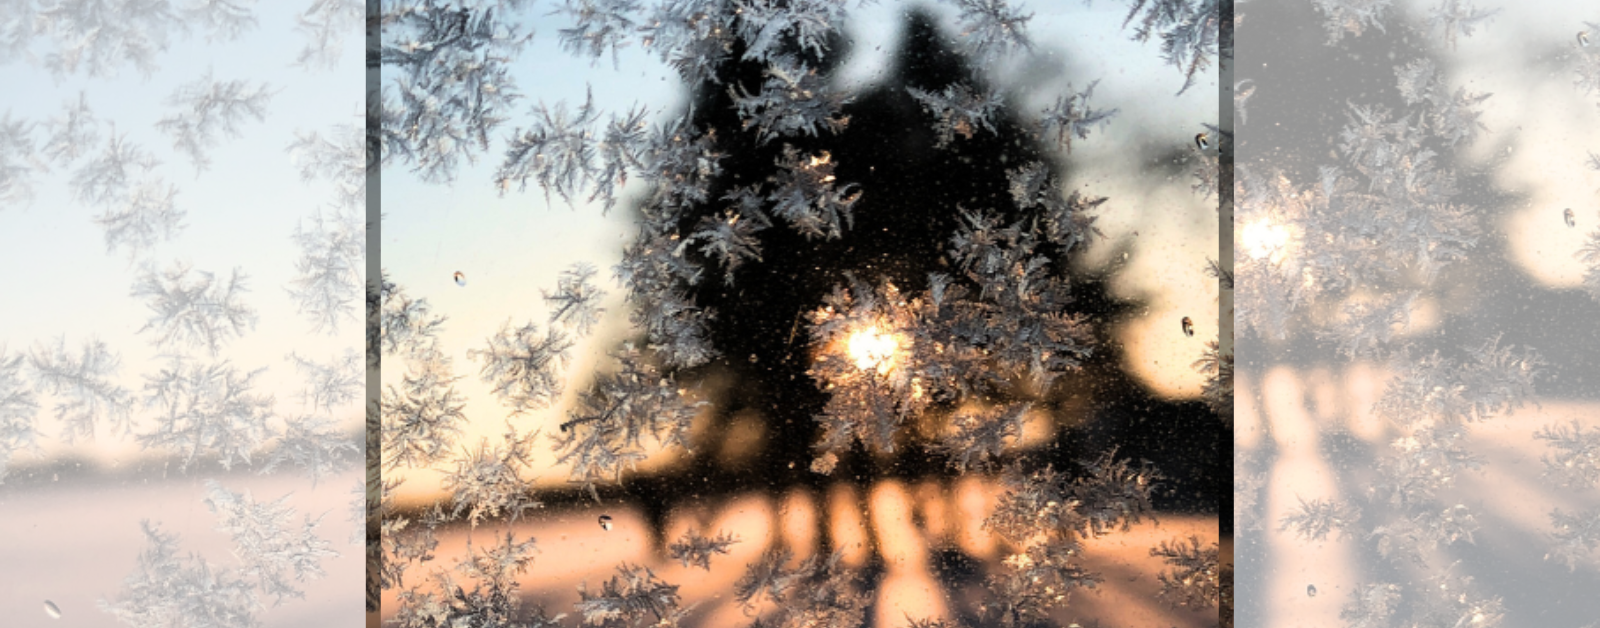 photo of ice crystals on glass with cedar trees blurred against a sunrise in the background